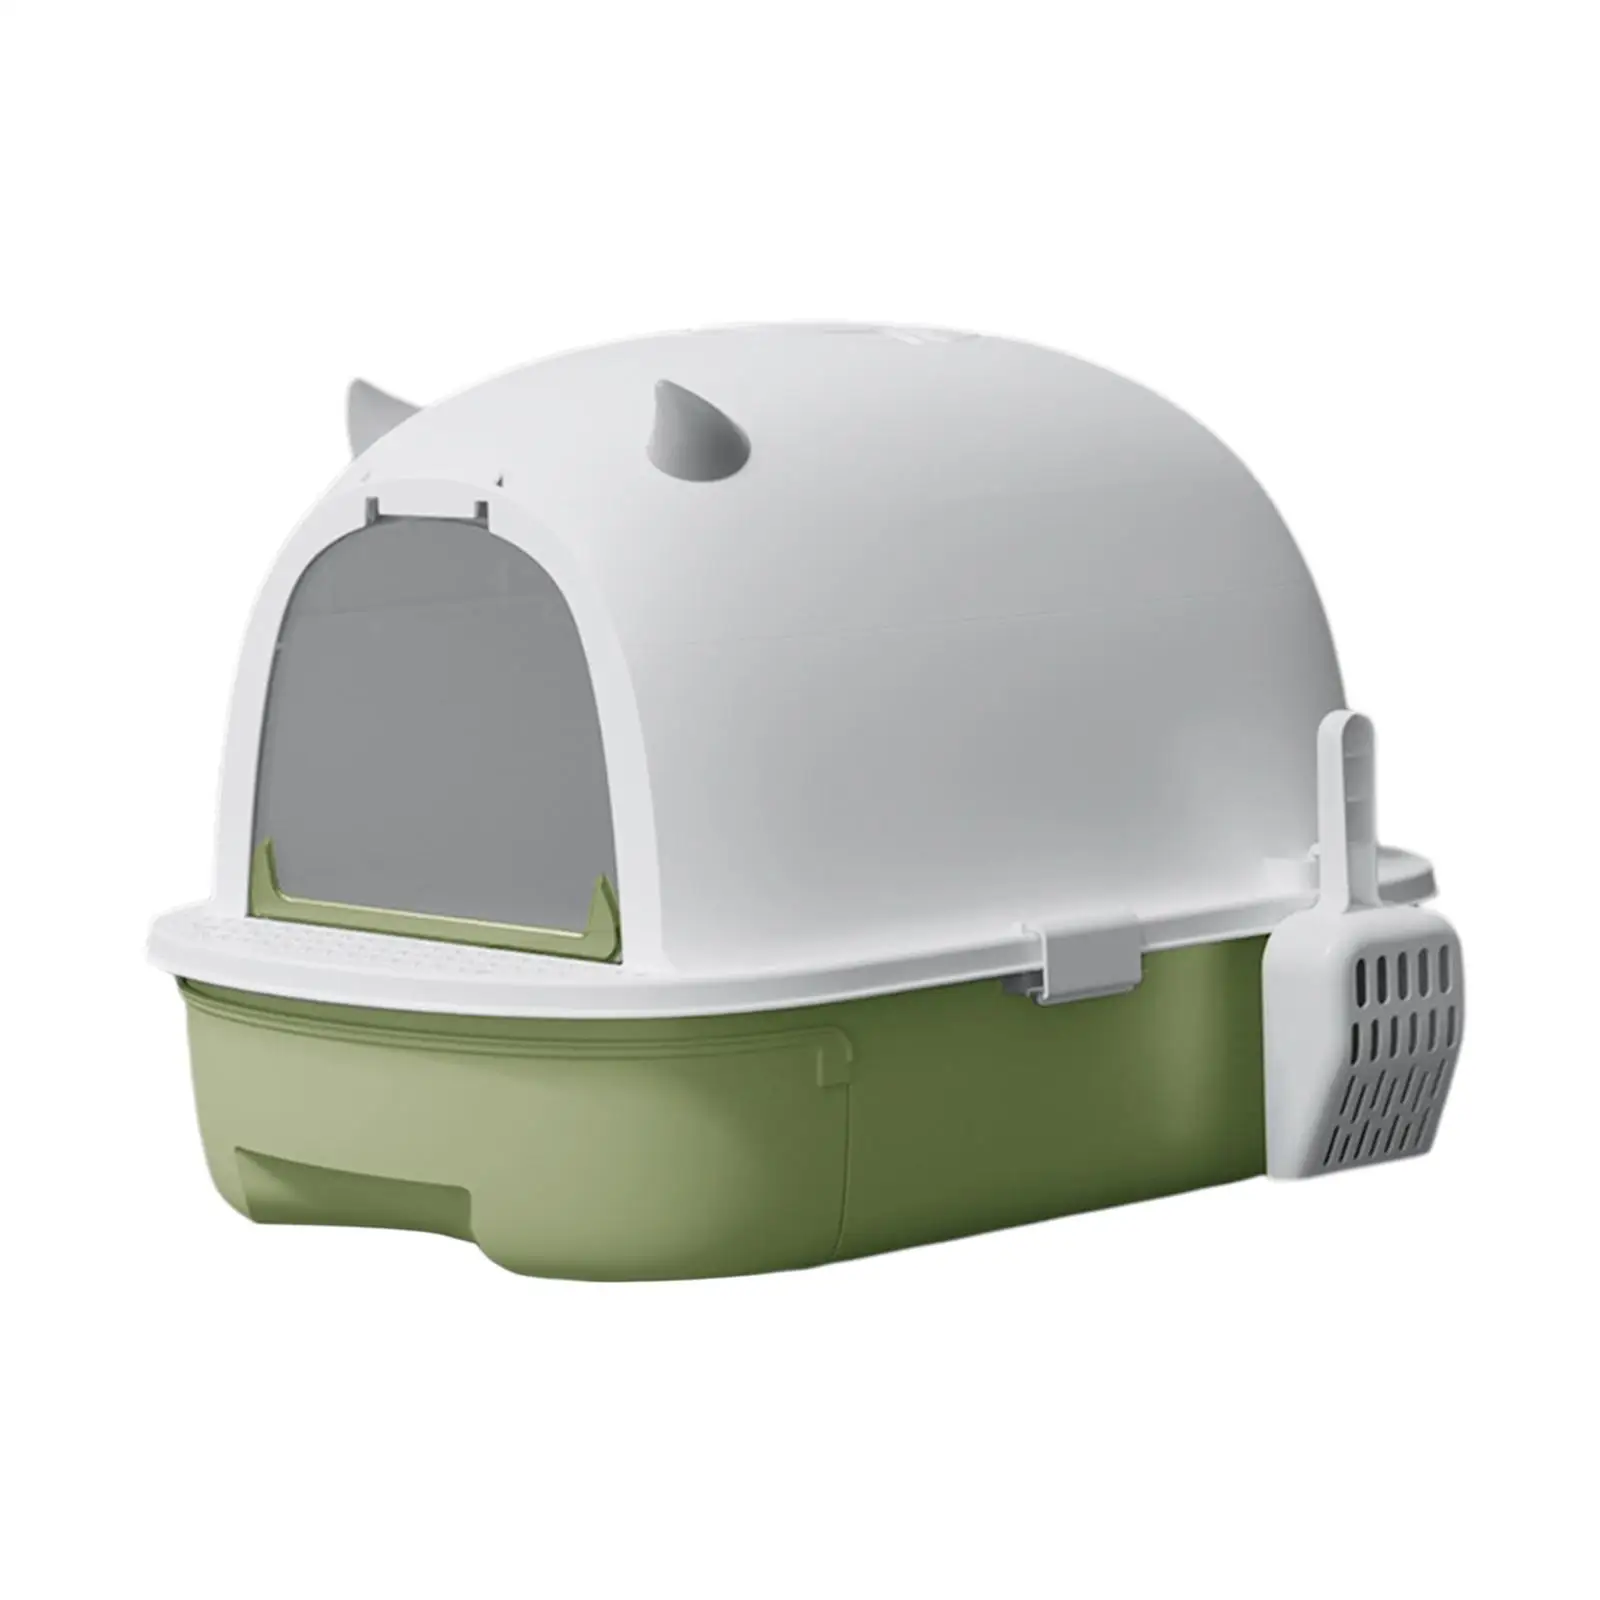 Hooded Cat Litter Box Removable Easy to Clean Accessories Portable Large with Door Cat Litter Tray with Shovel Kitten Potty